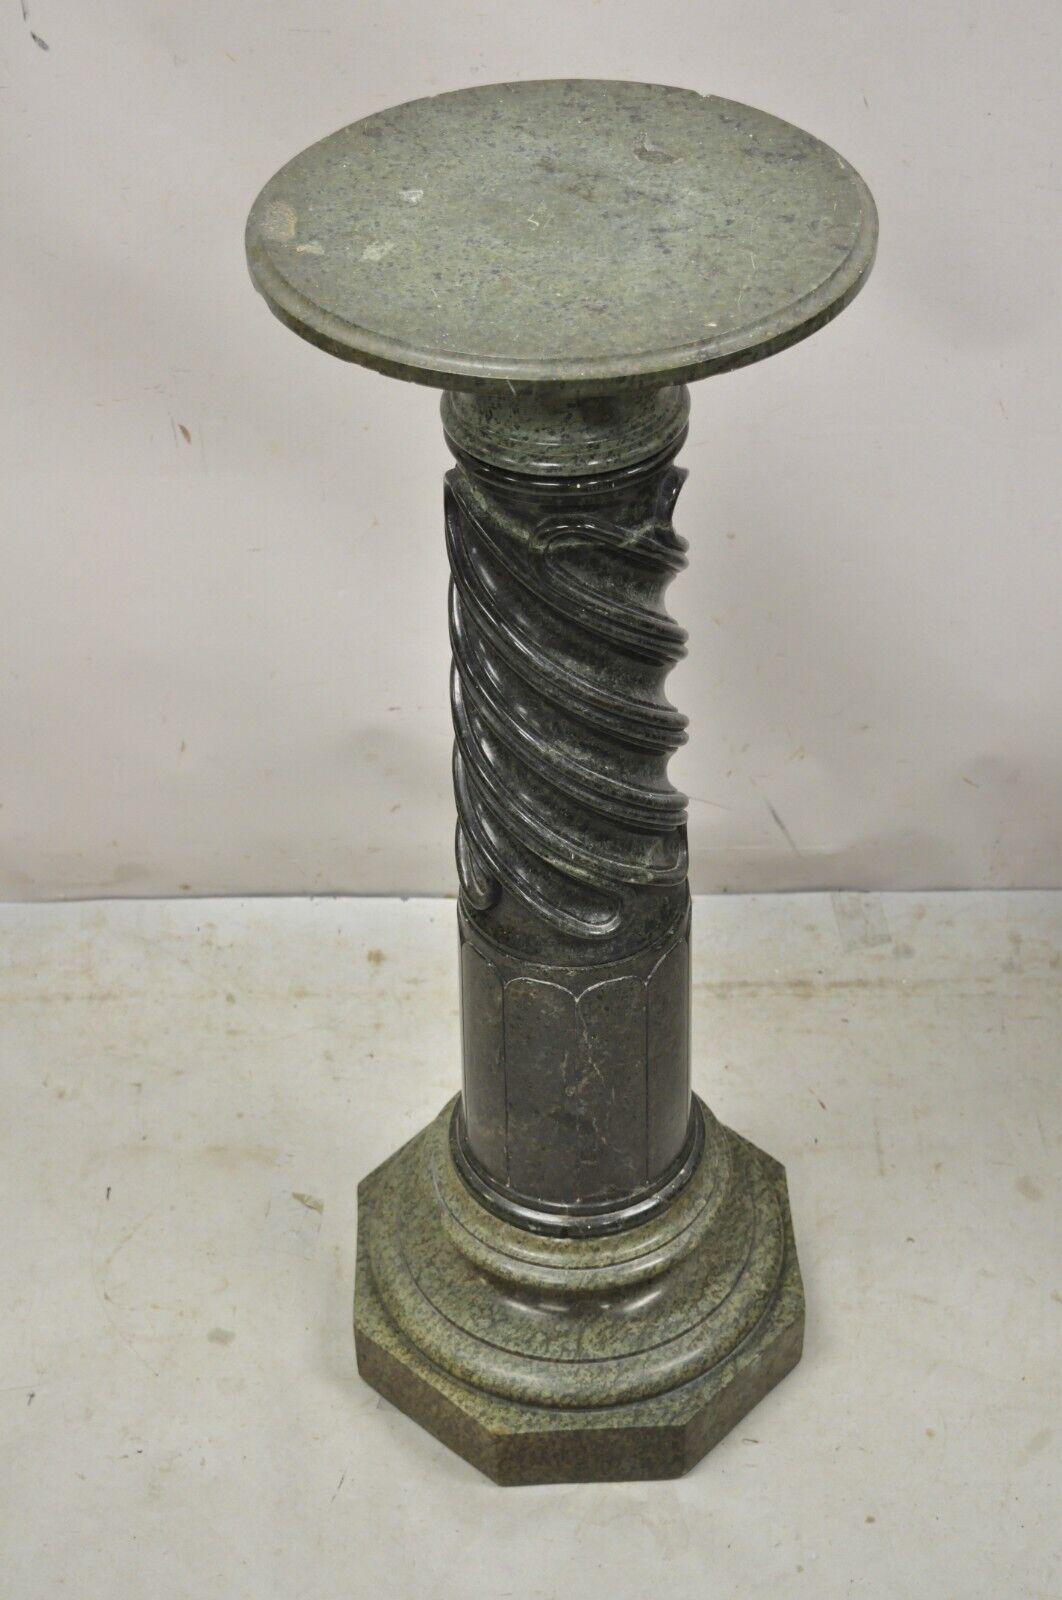 Antique Italian Classical Style Green Marble Spiral Carved Round Pedestal Plant Stand. Circa Early to Mid 20th Century.
Measurements: 39.5